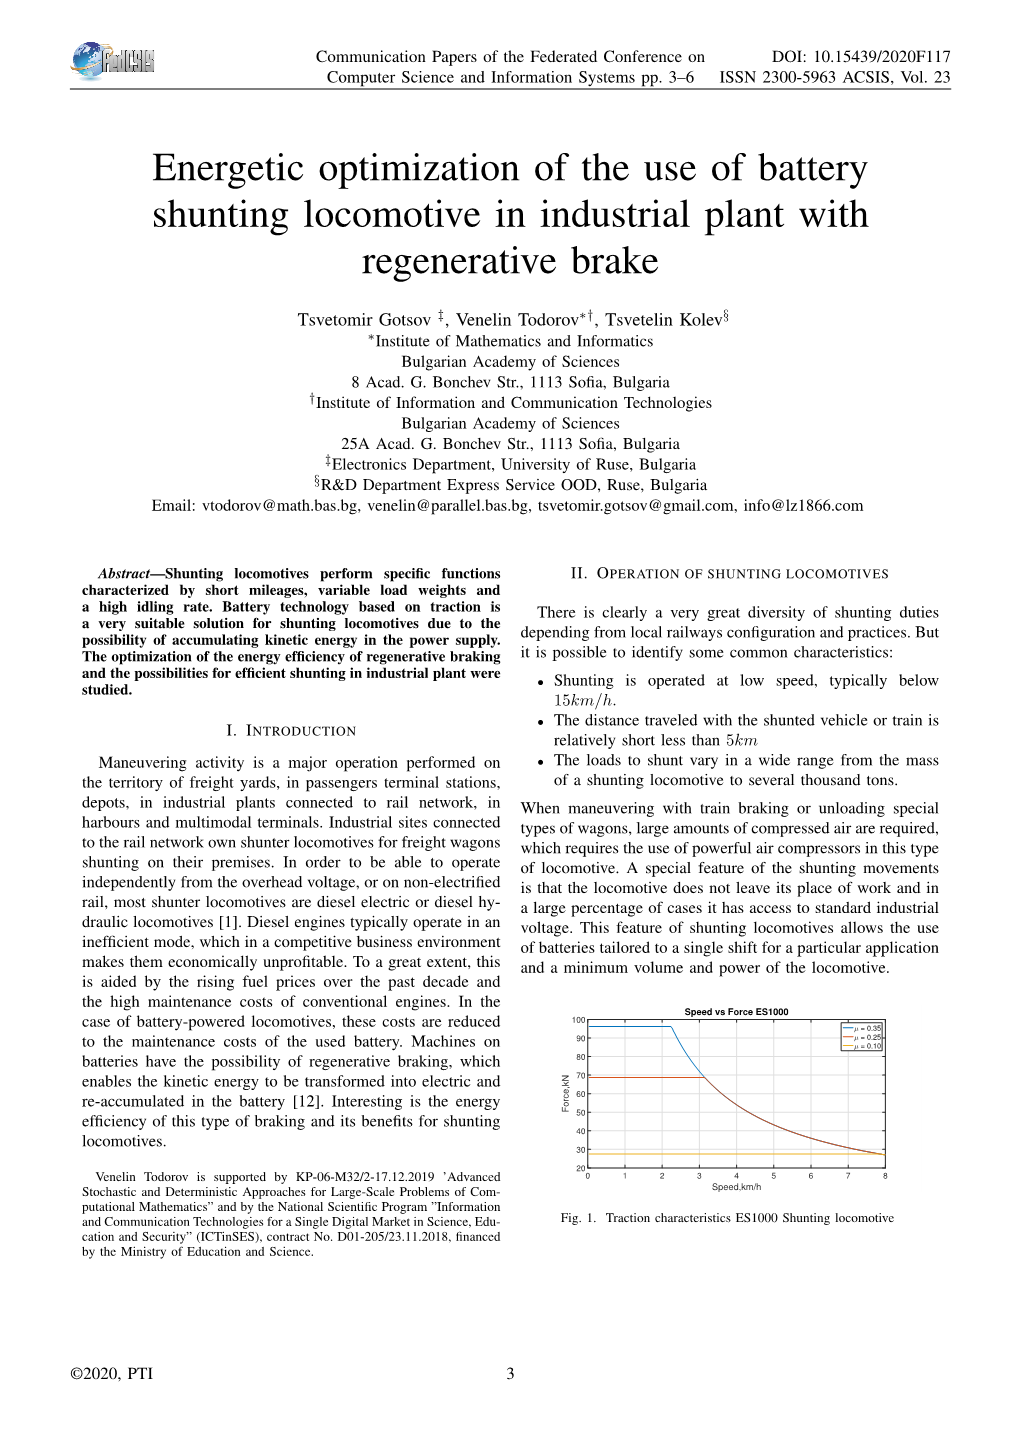 Energetic Optimization of the Use of Battery Shunting Locomotive in Industrial Plant with Regenerative Brake